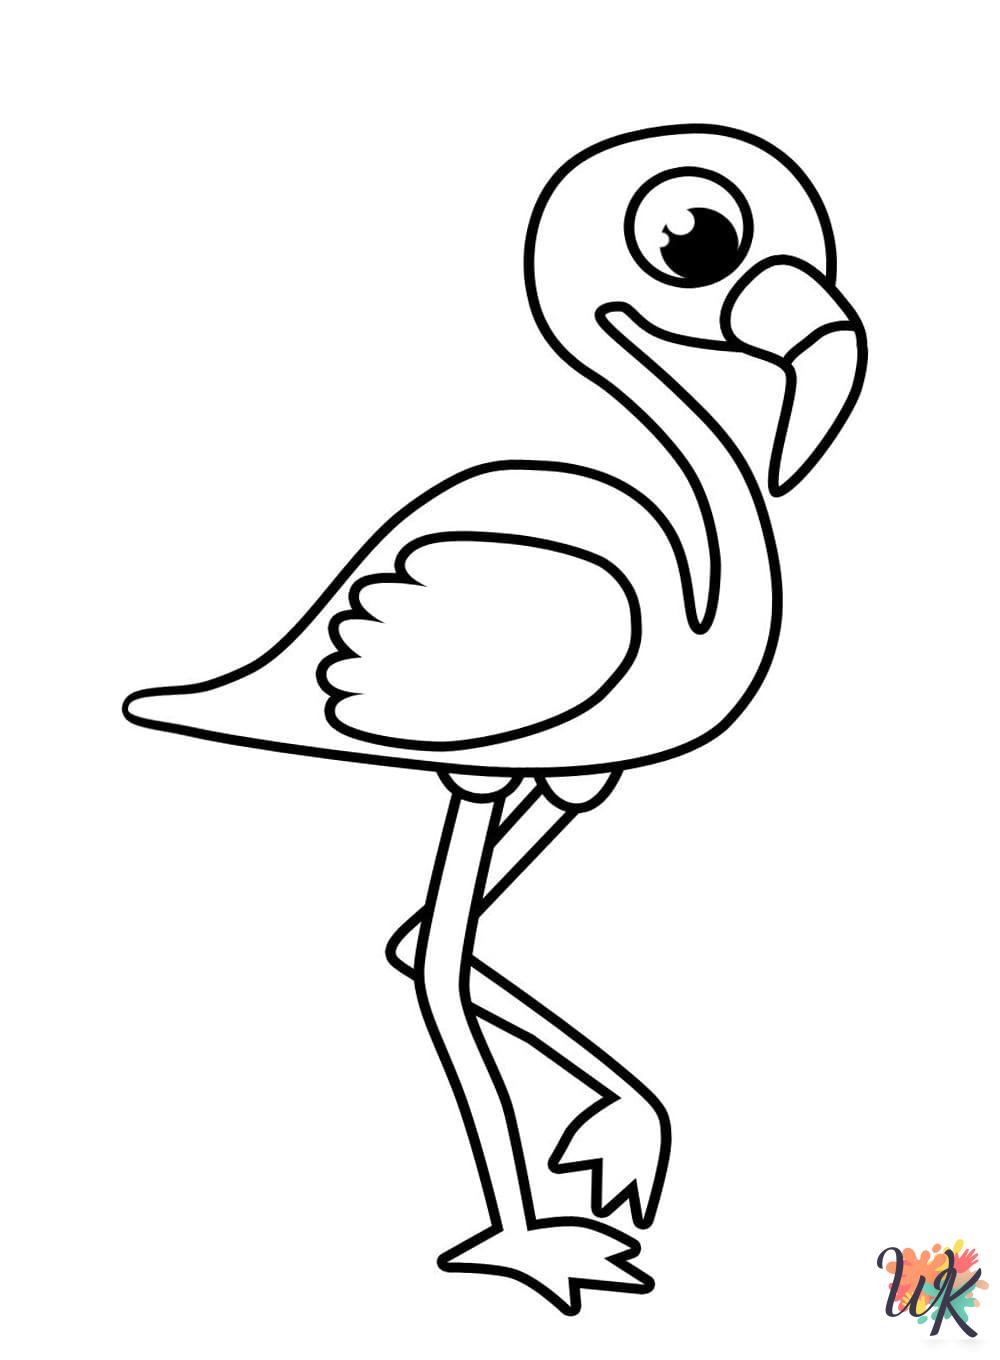 Flamingo coloring pages easy